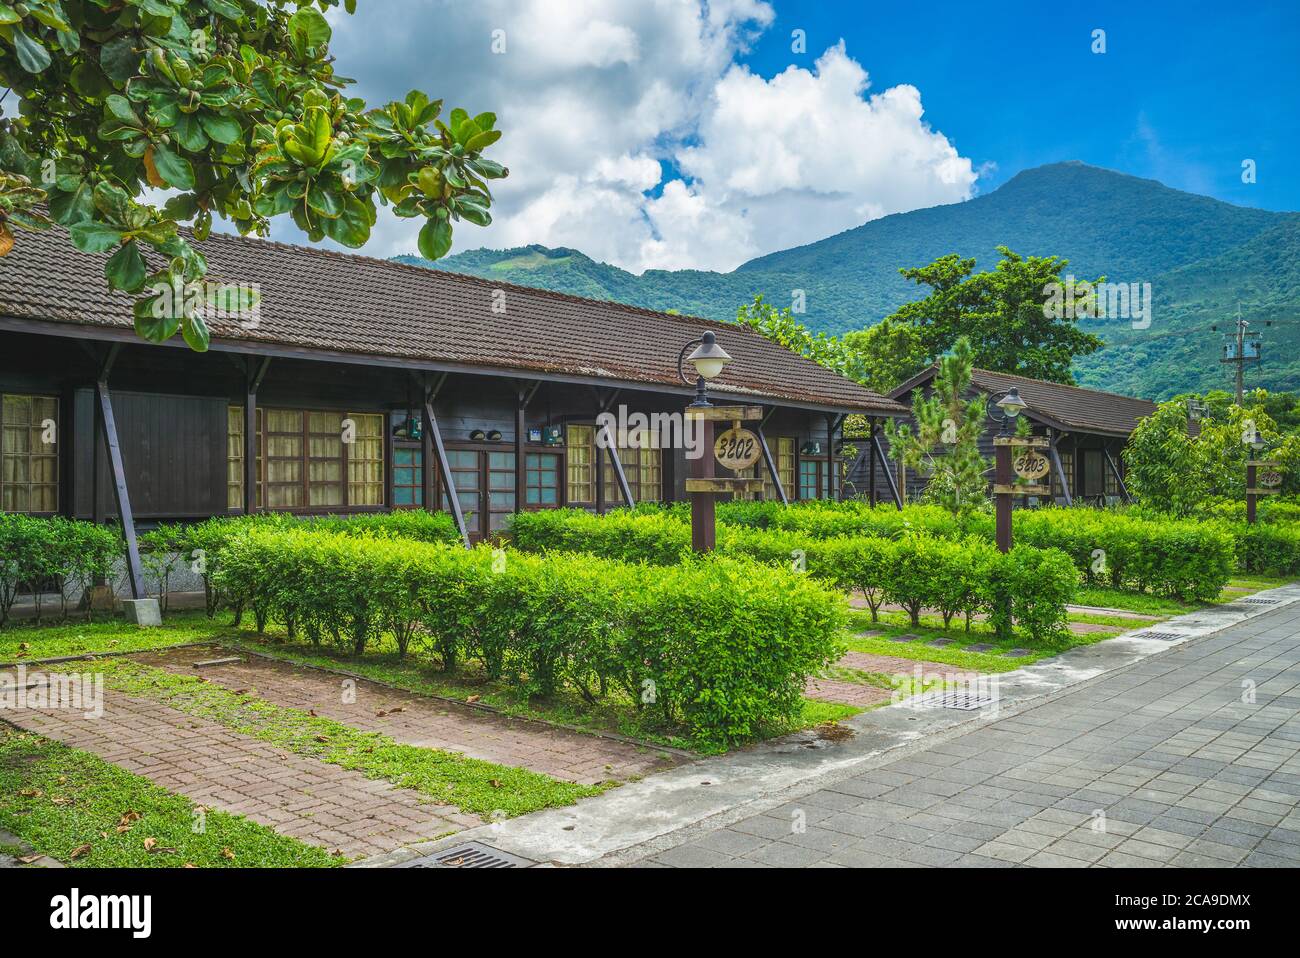 ancient dormitory of hualien tourism sugar factory in taiwan Stock Photo